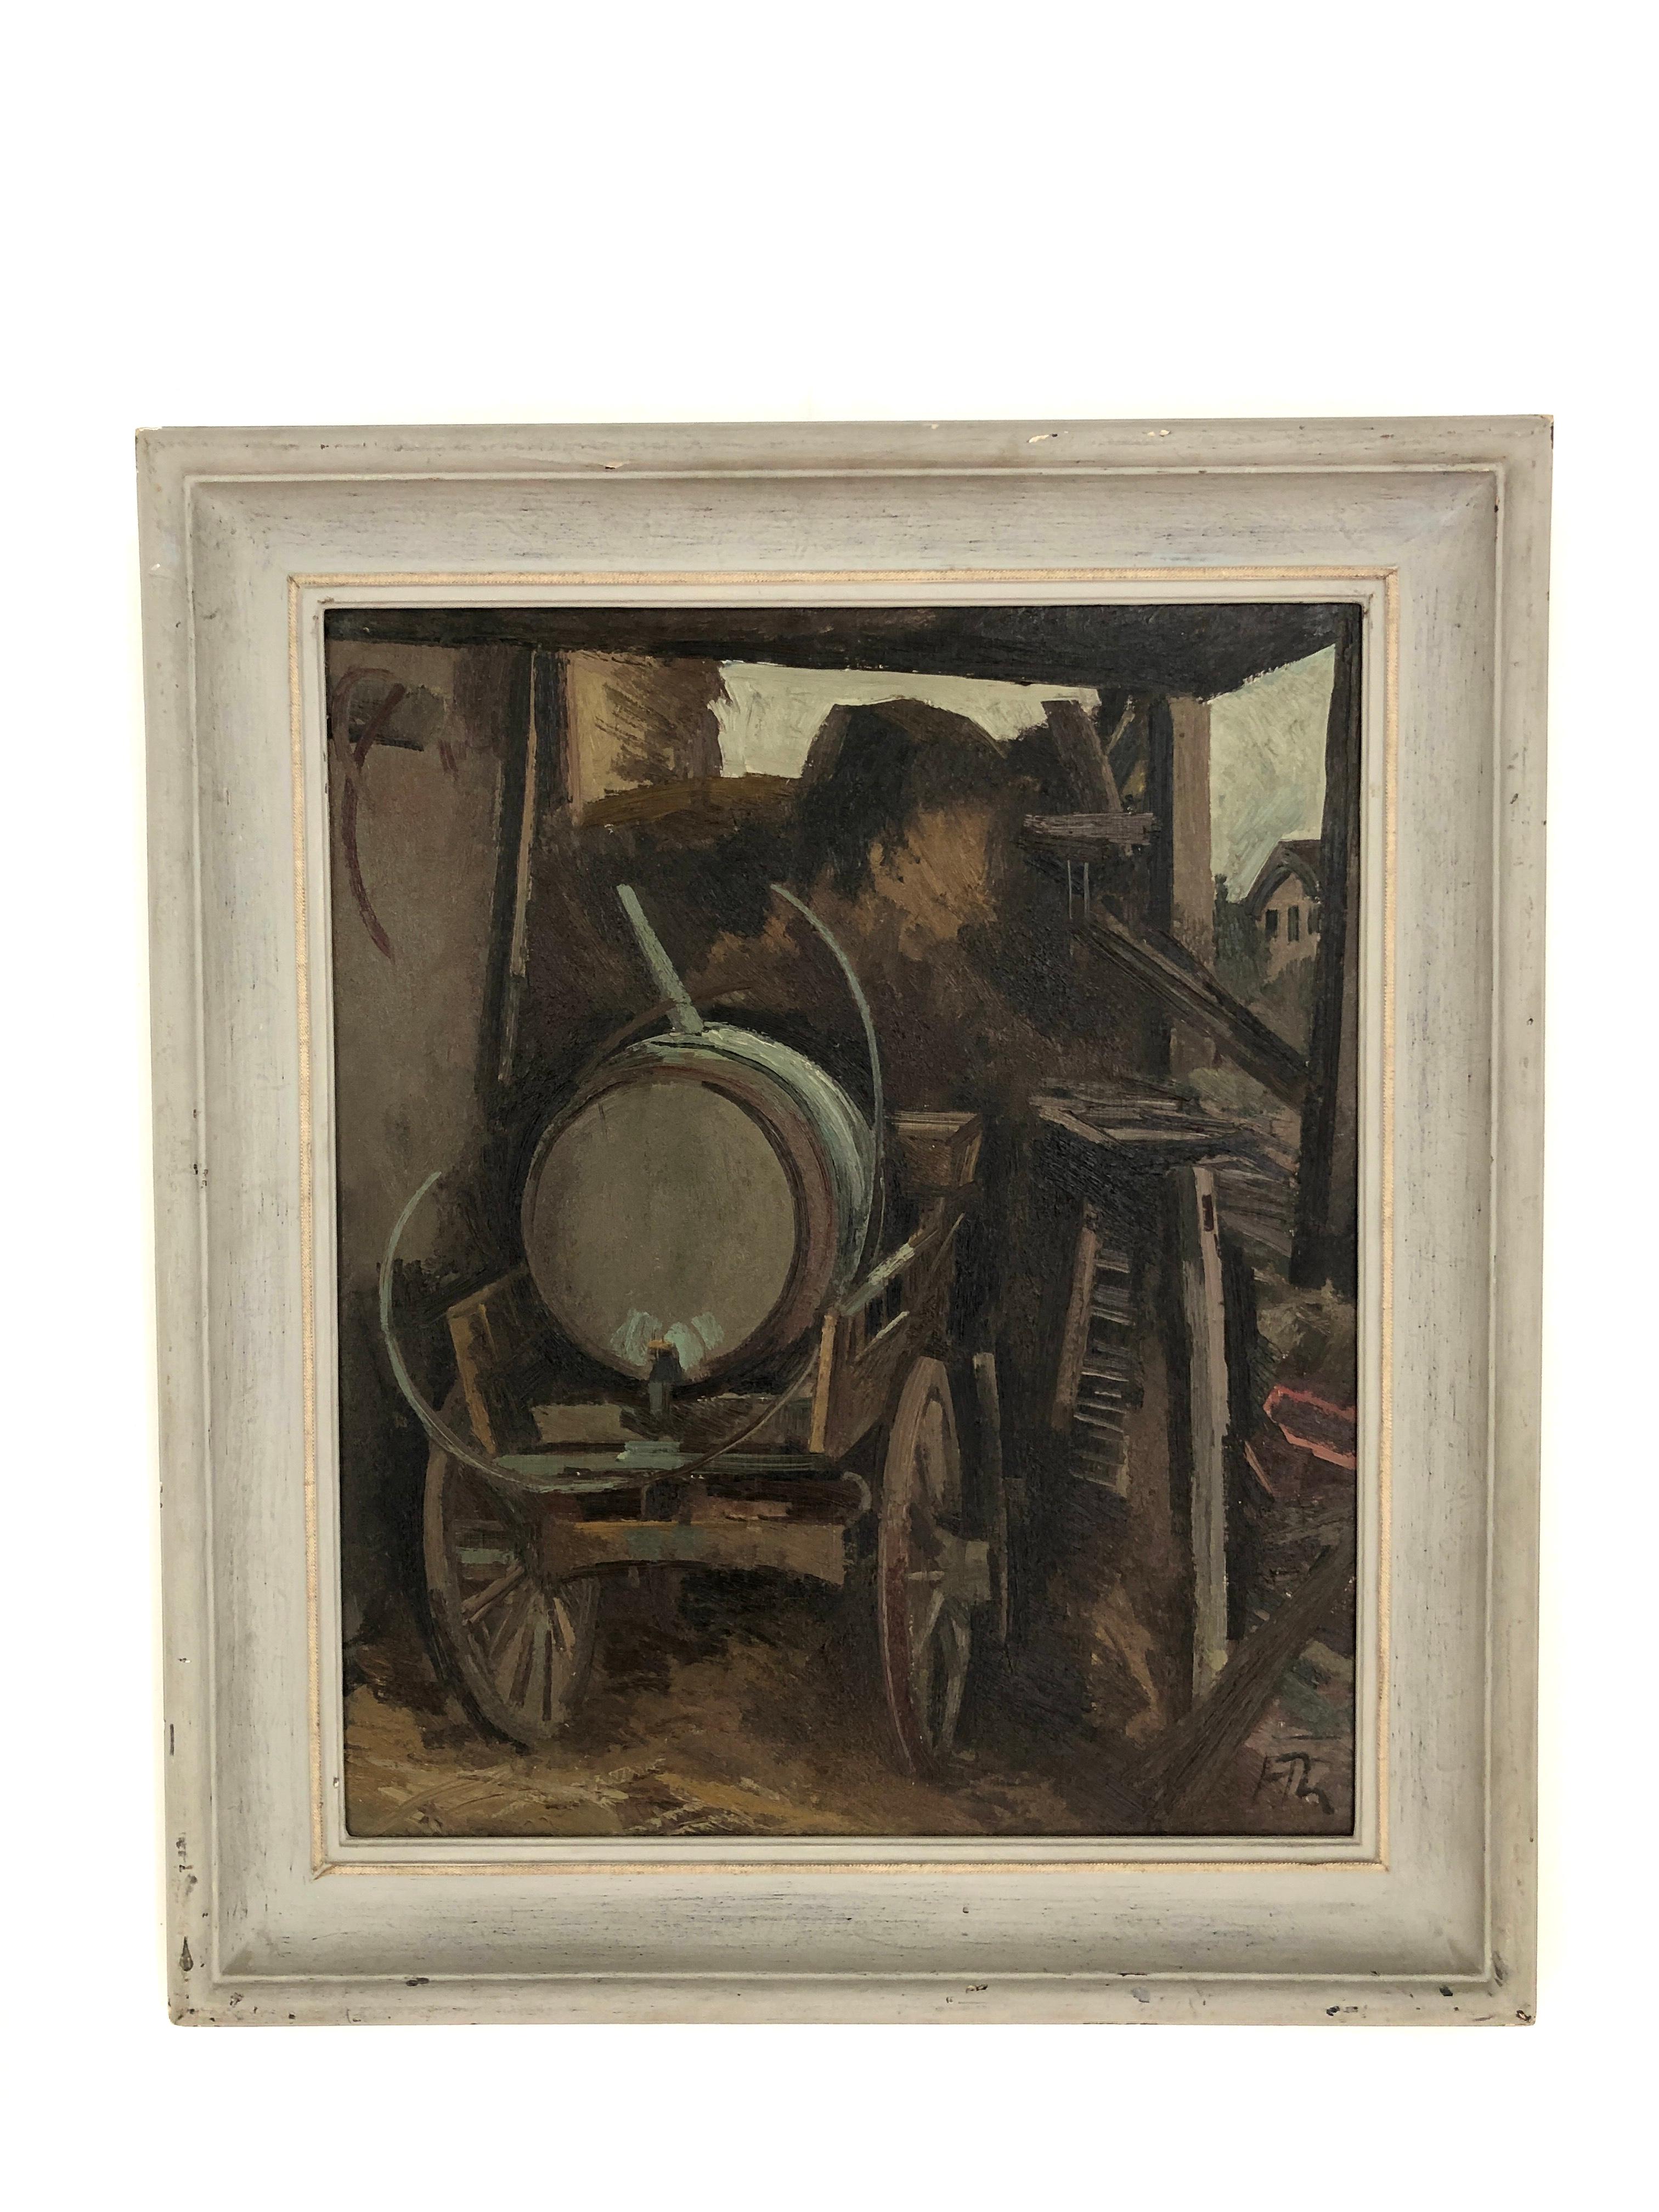 Cart and barrel in the barn - Painting by Herbert Theurillat